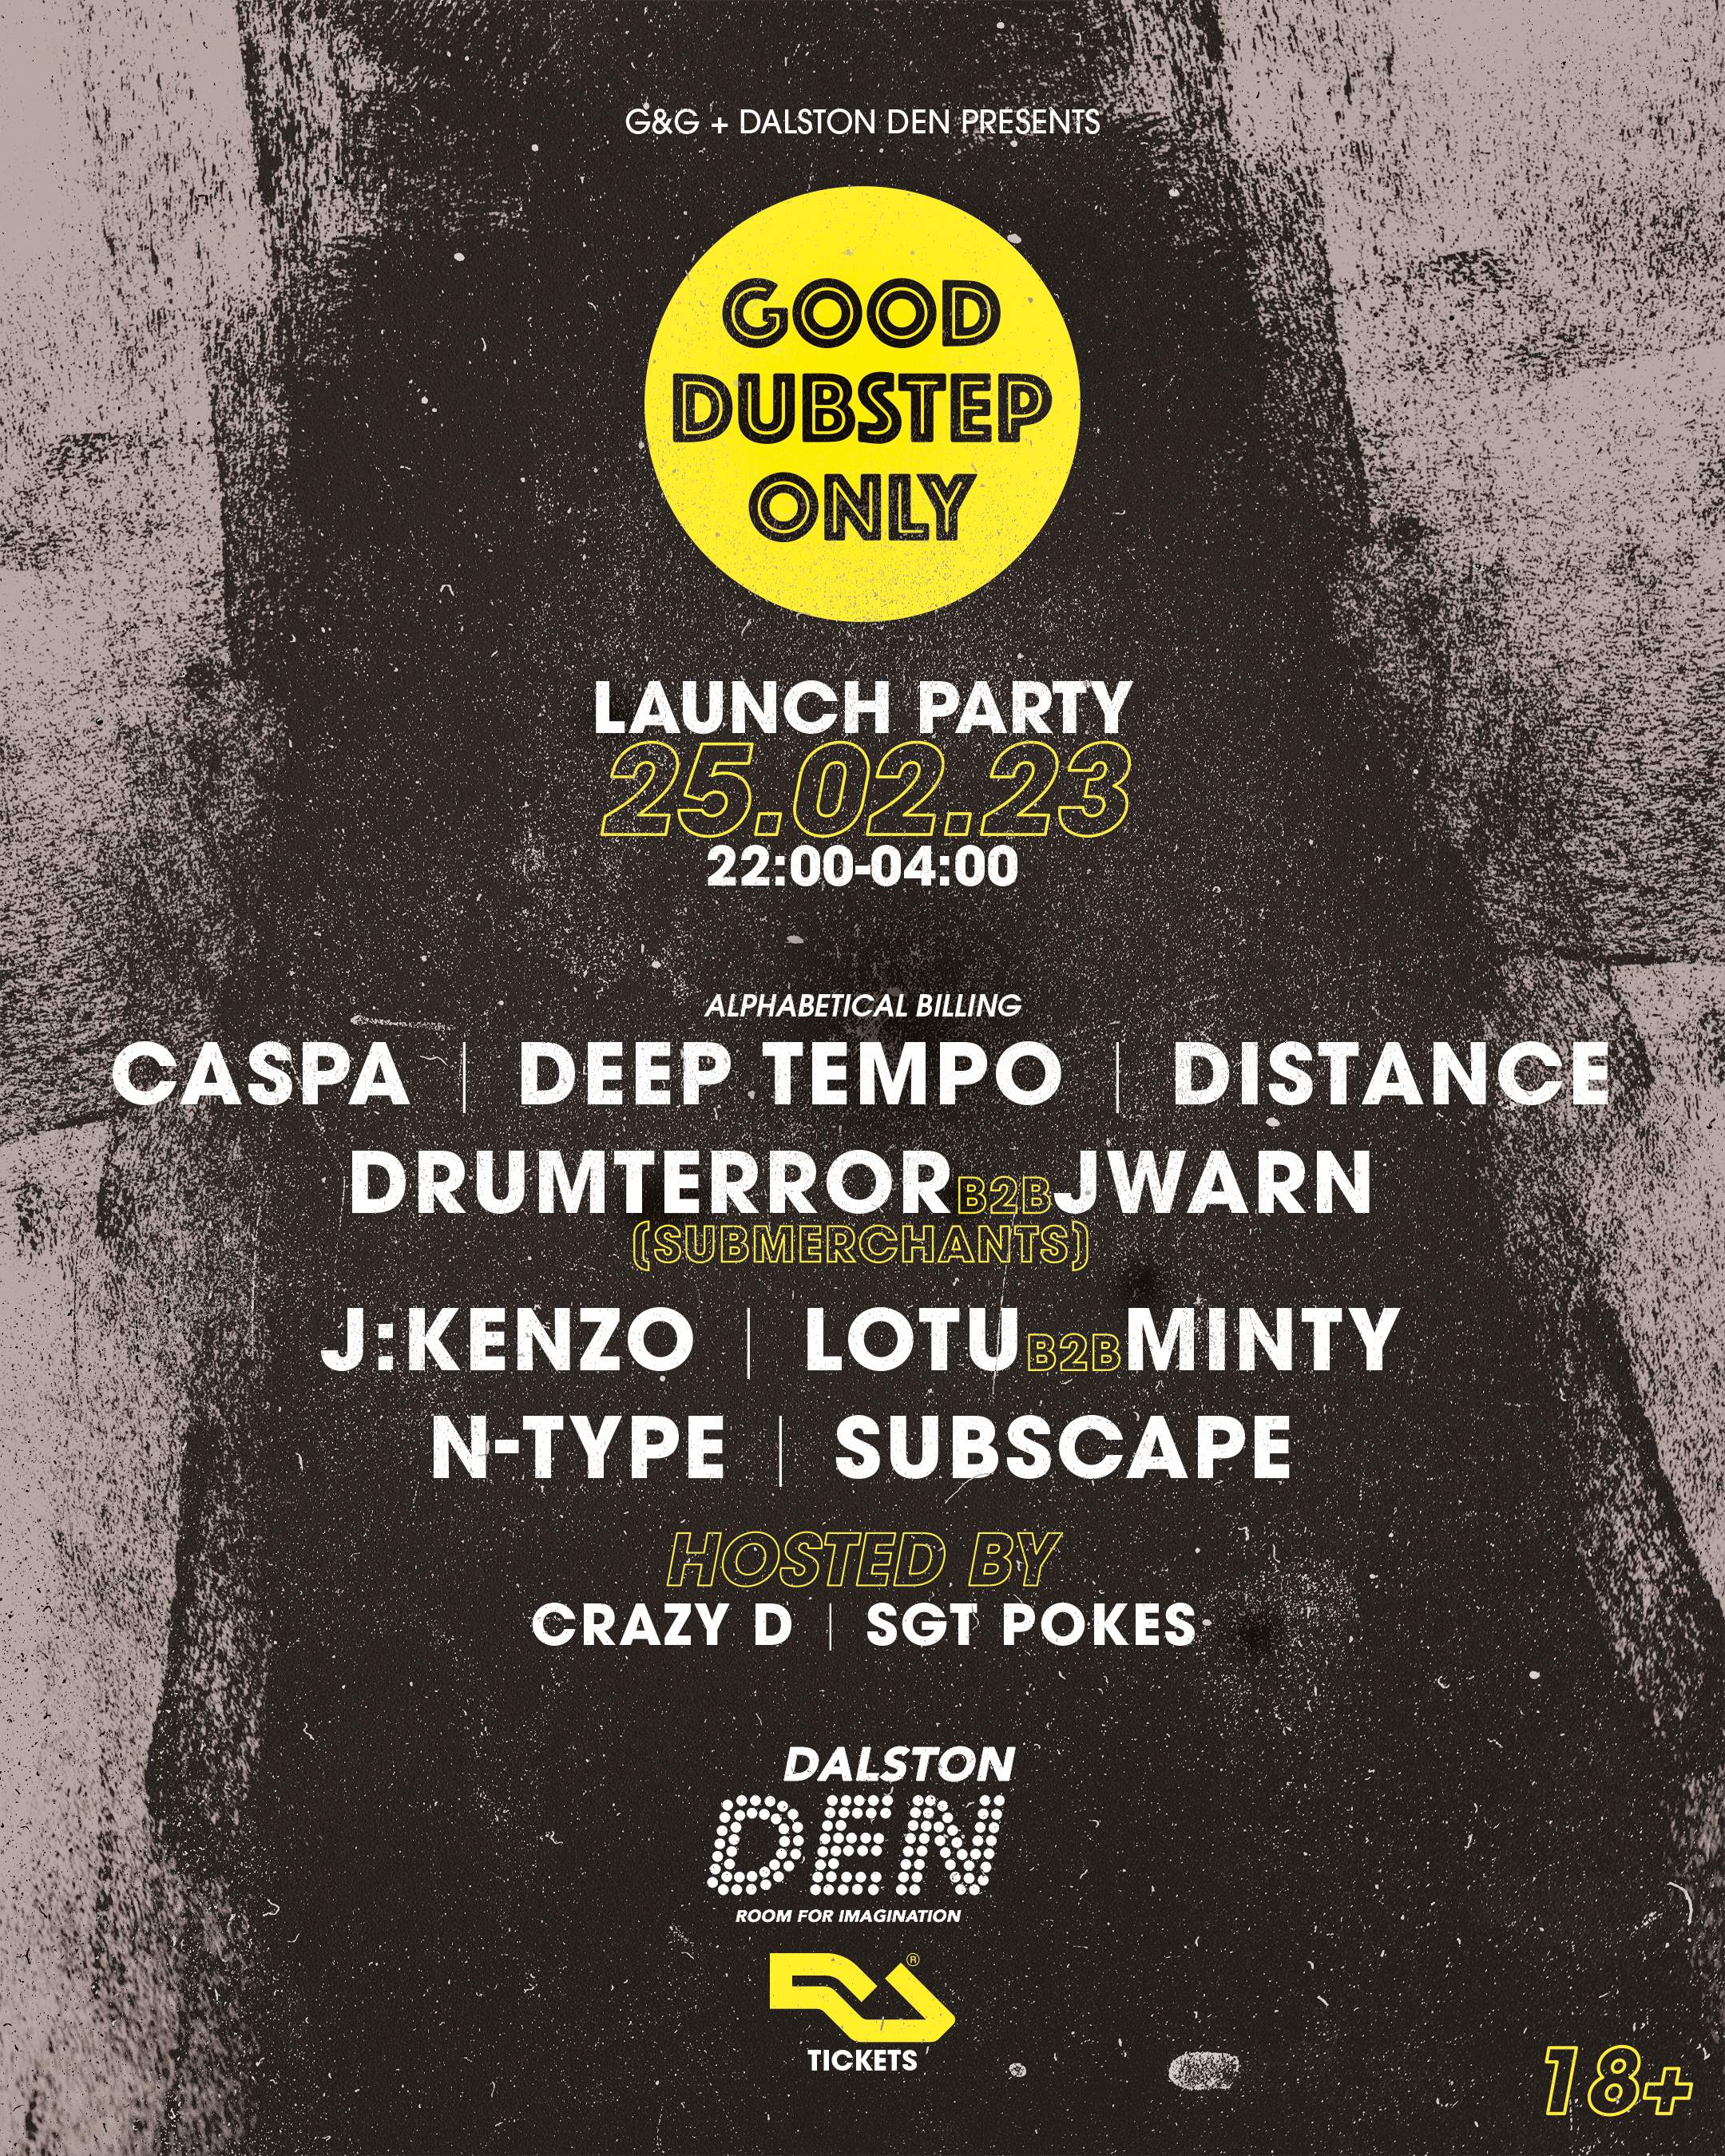 Good Dubstep Only Launch Party - Página frontal